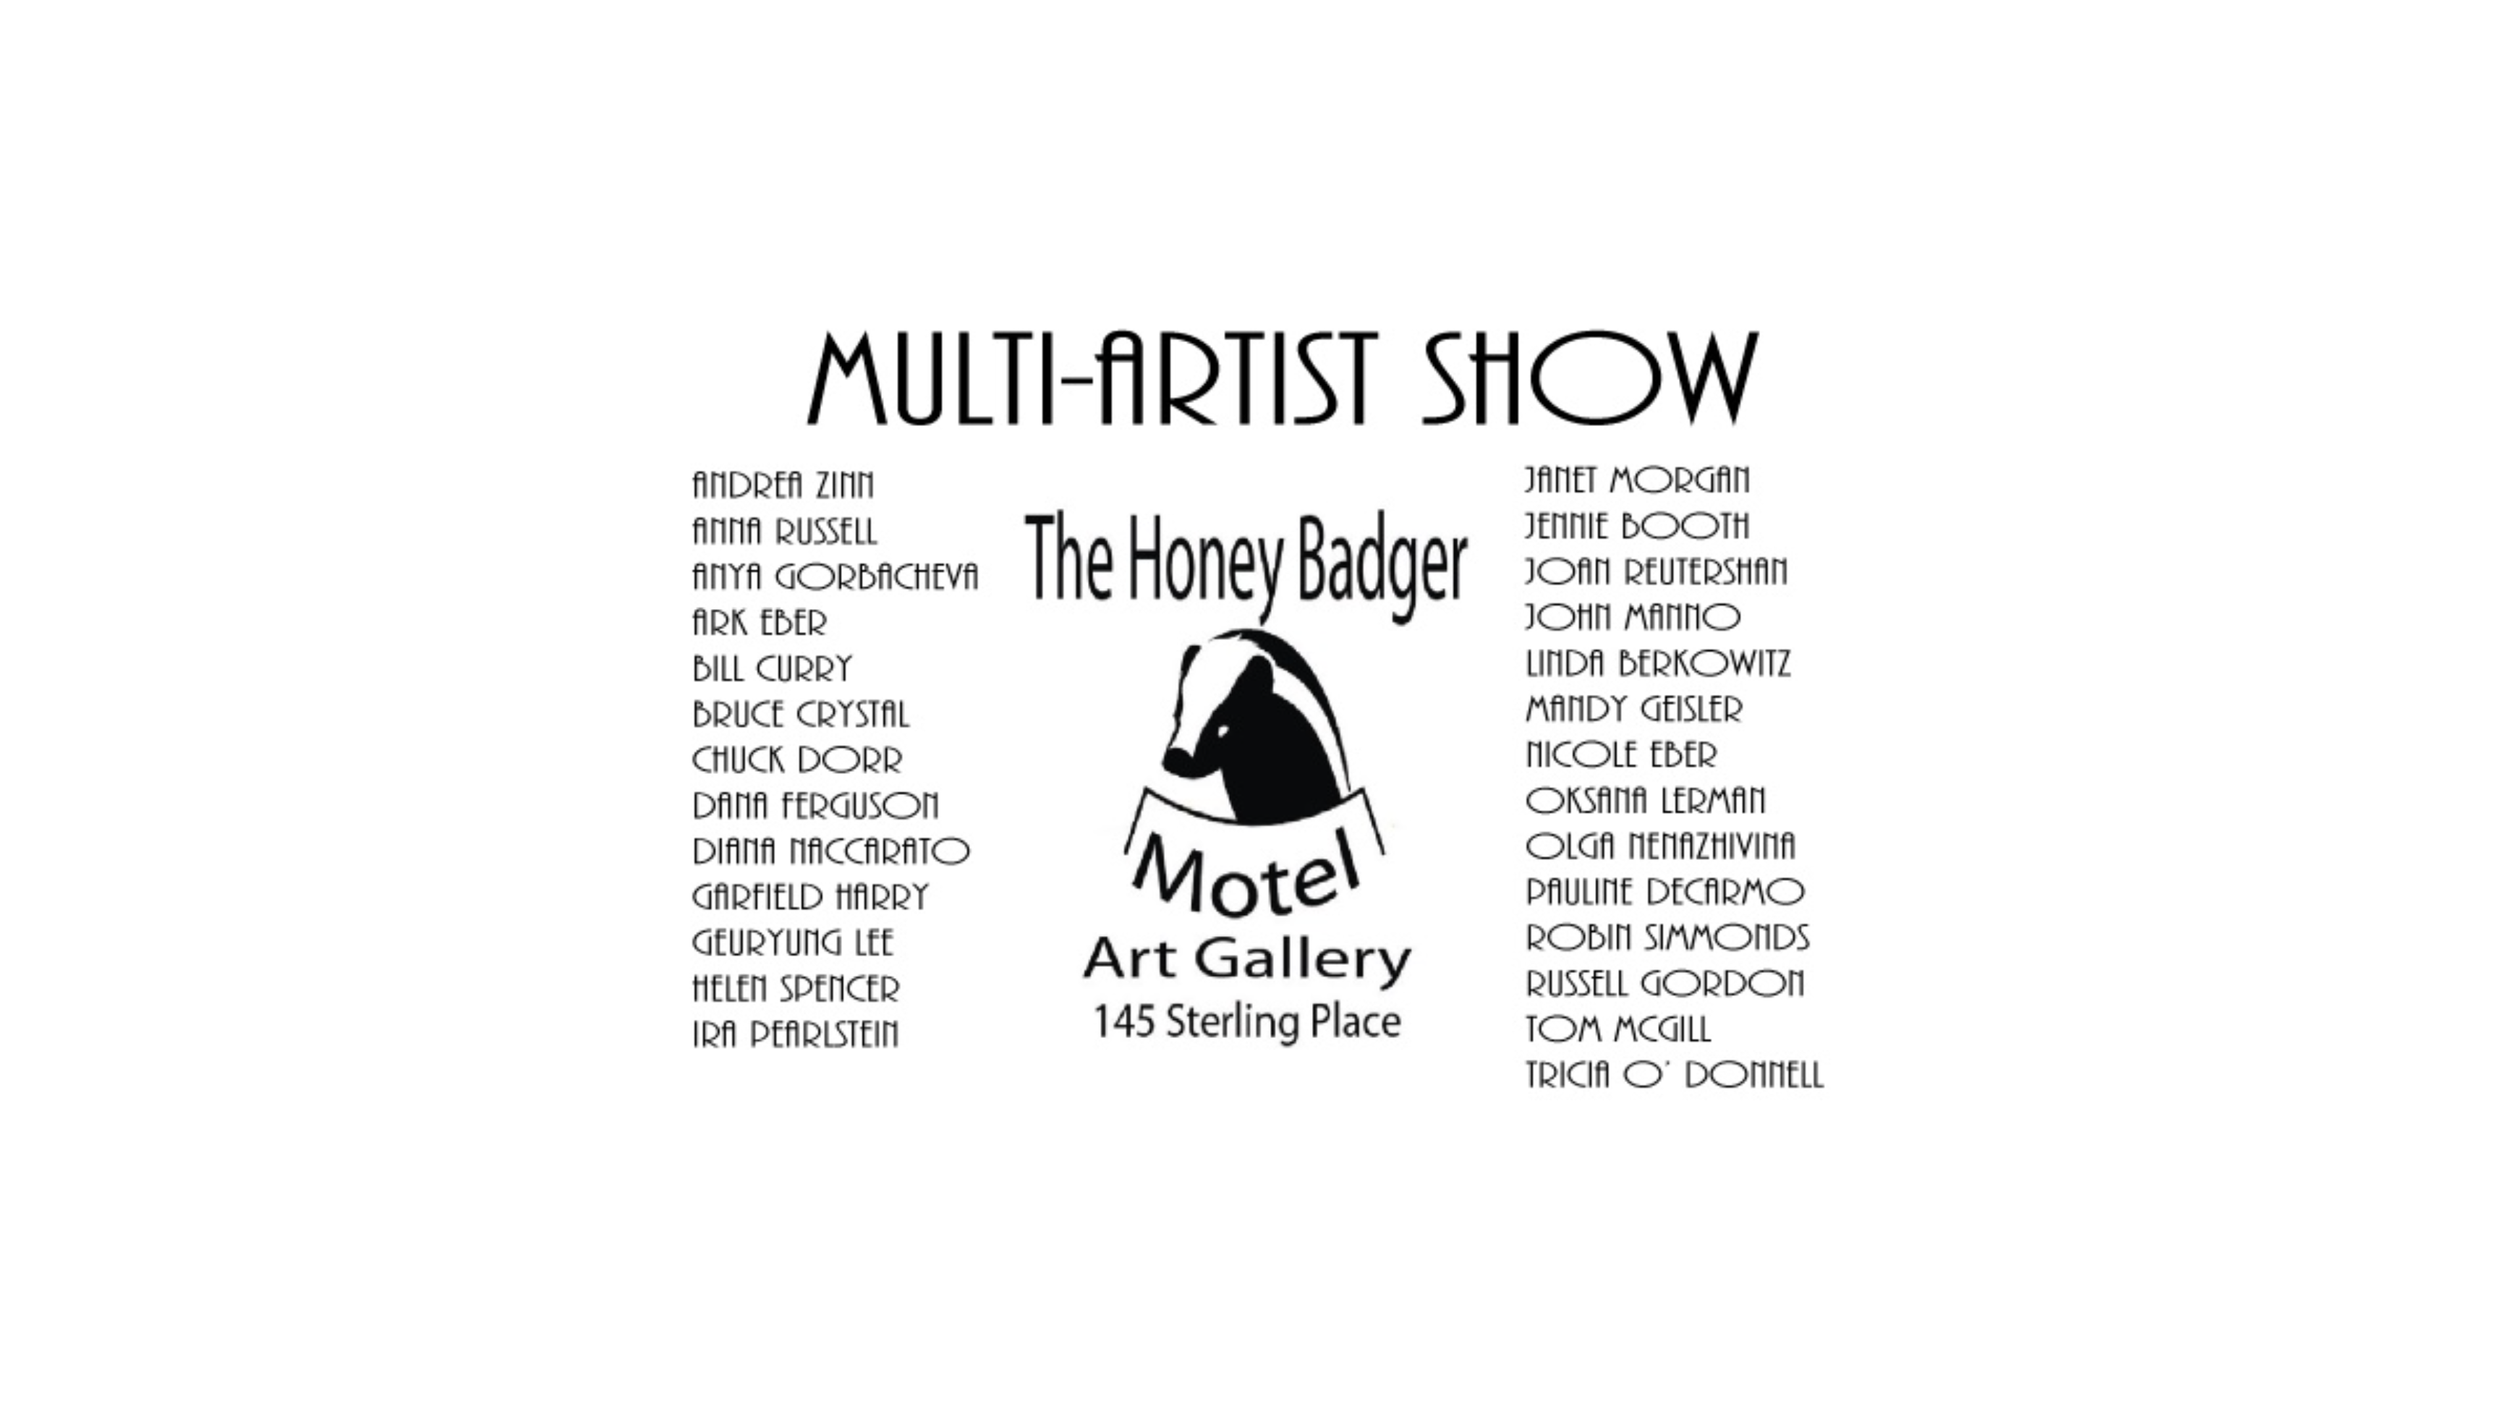 Group Show at The Honey Badger Motel Art Gallery